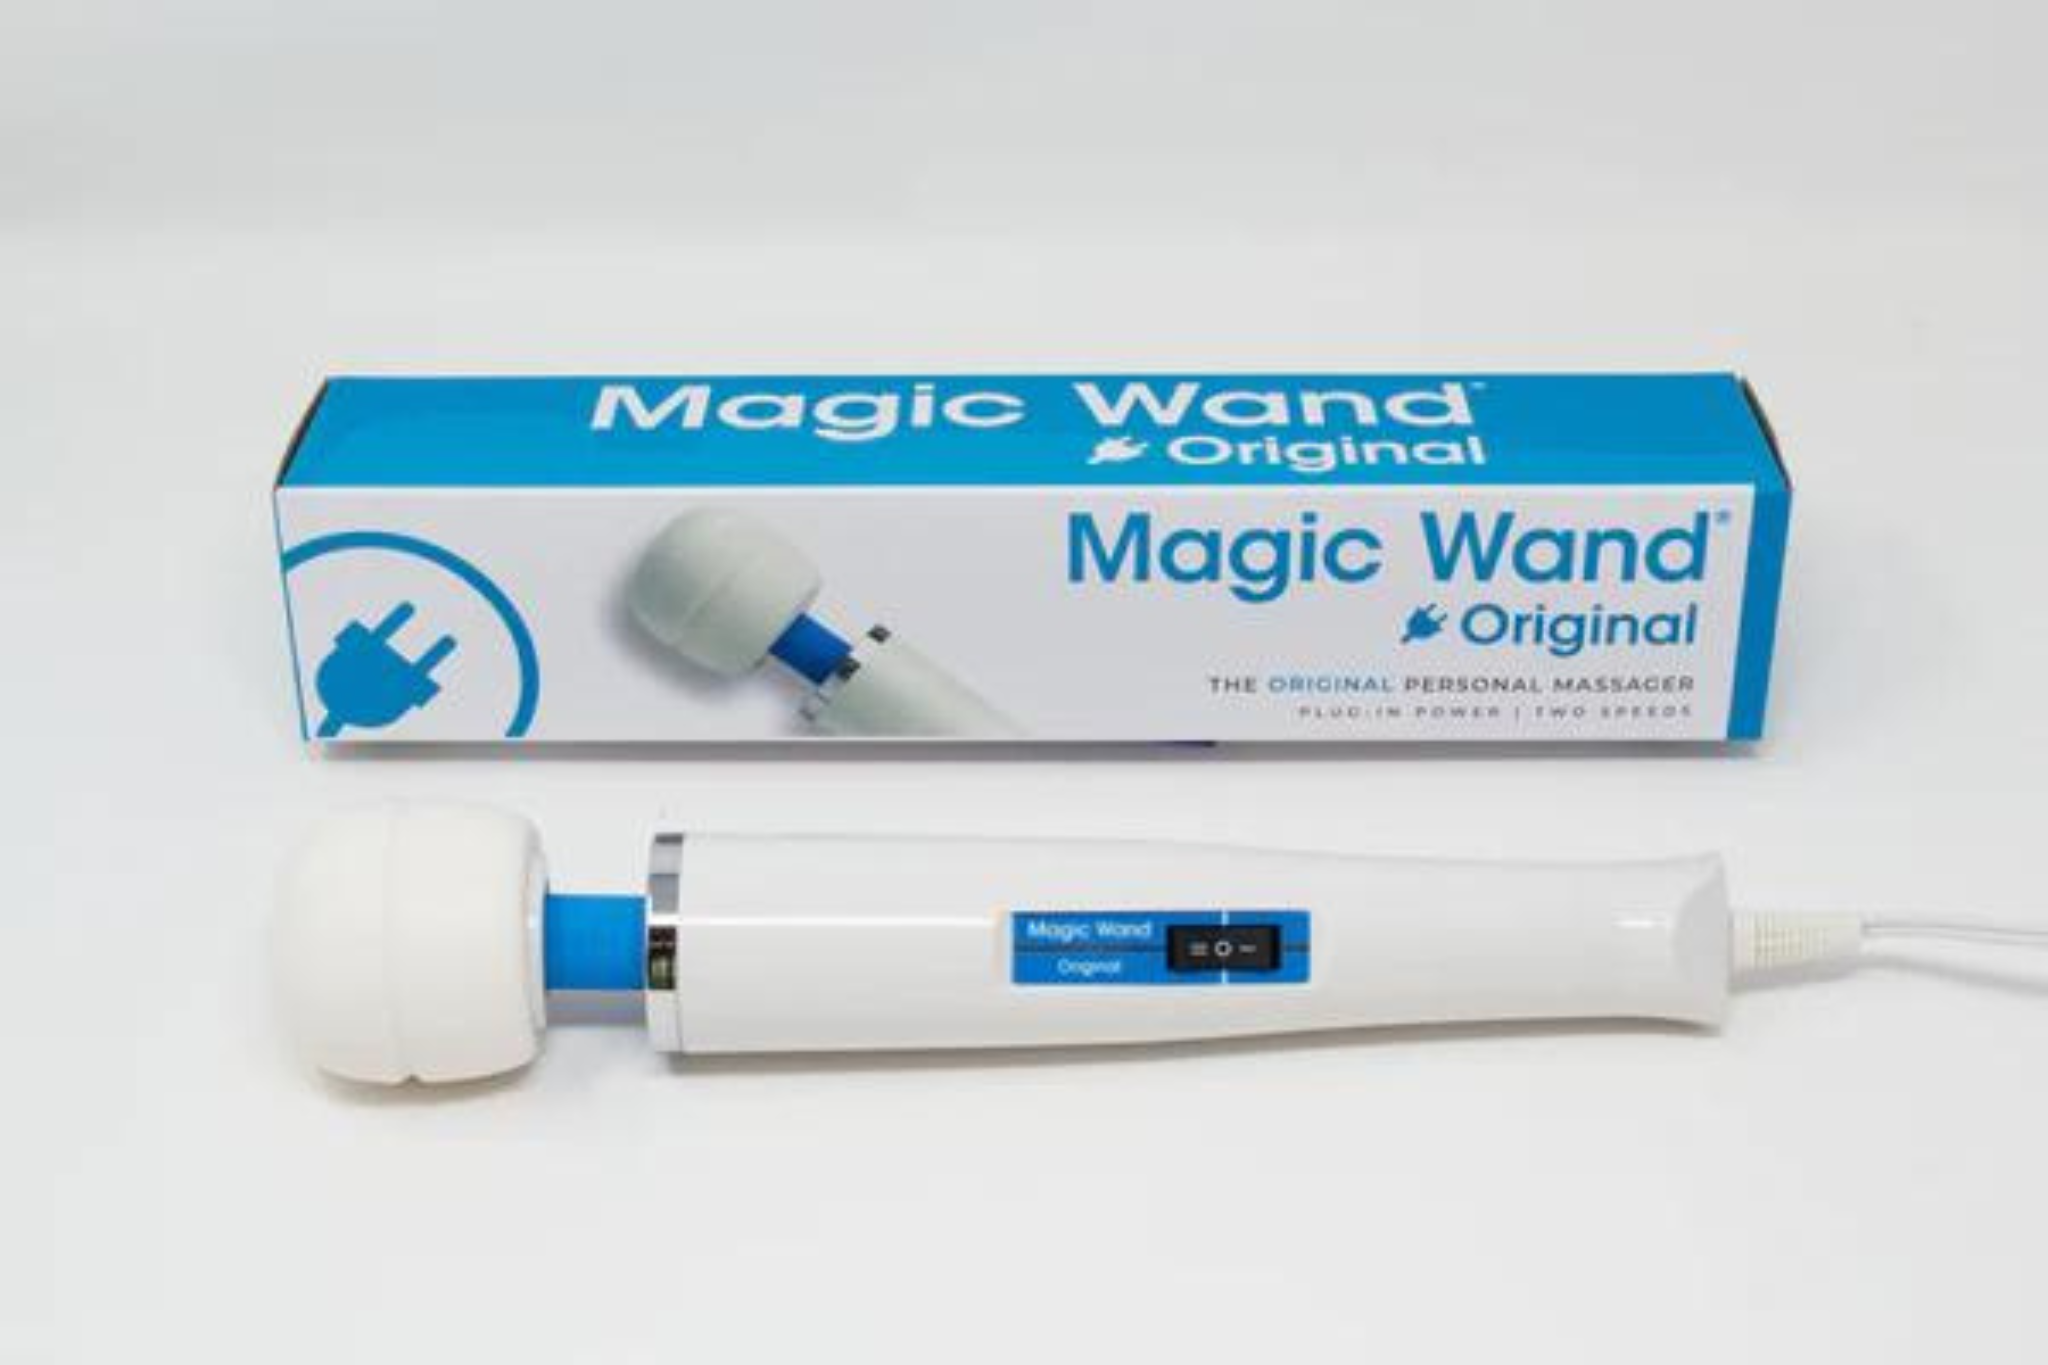 The History of the Magic Wand